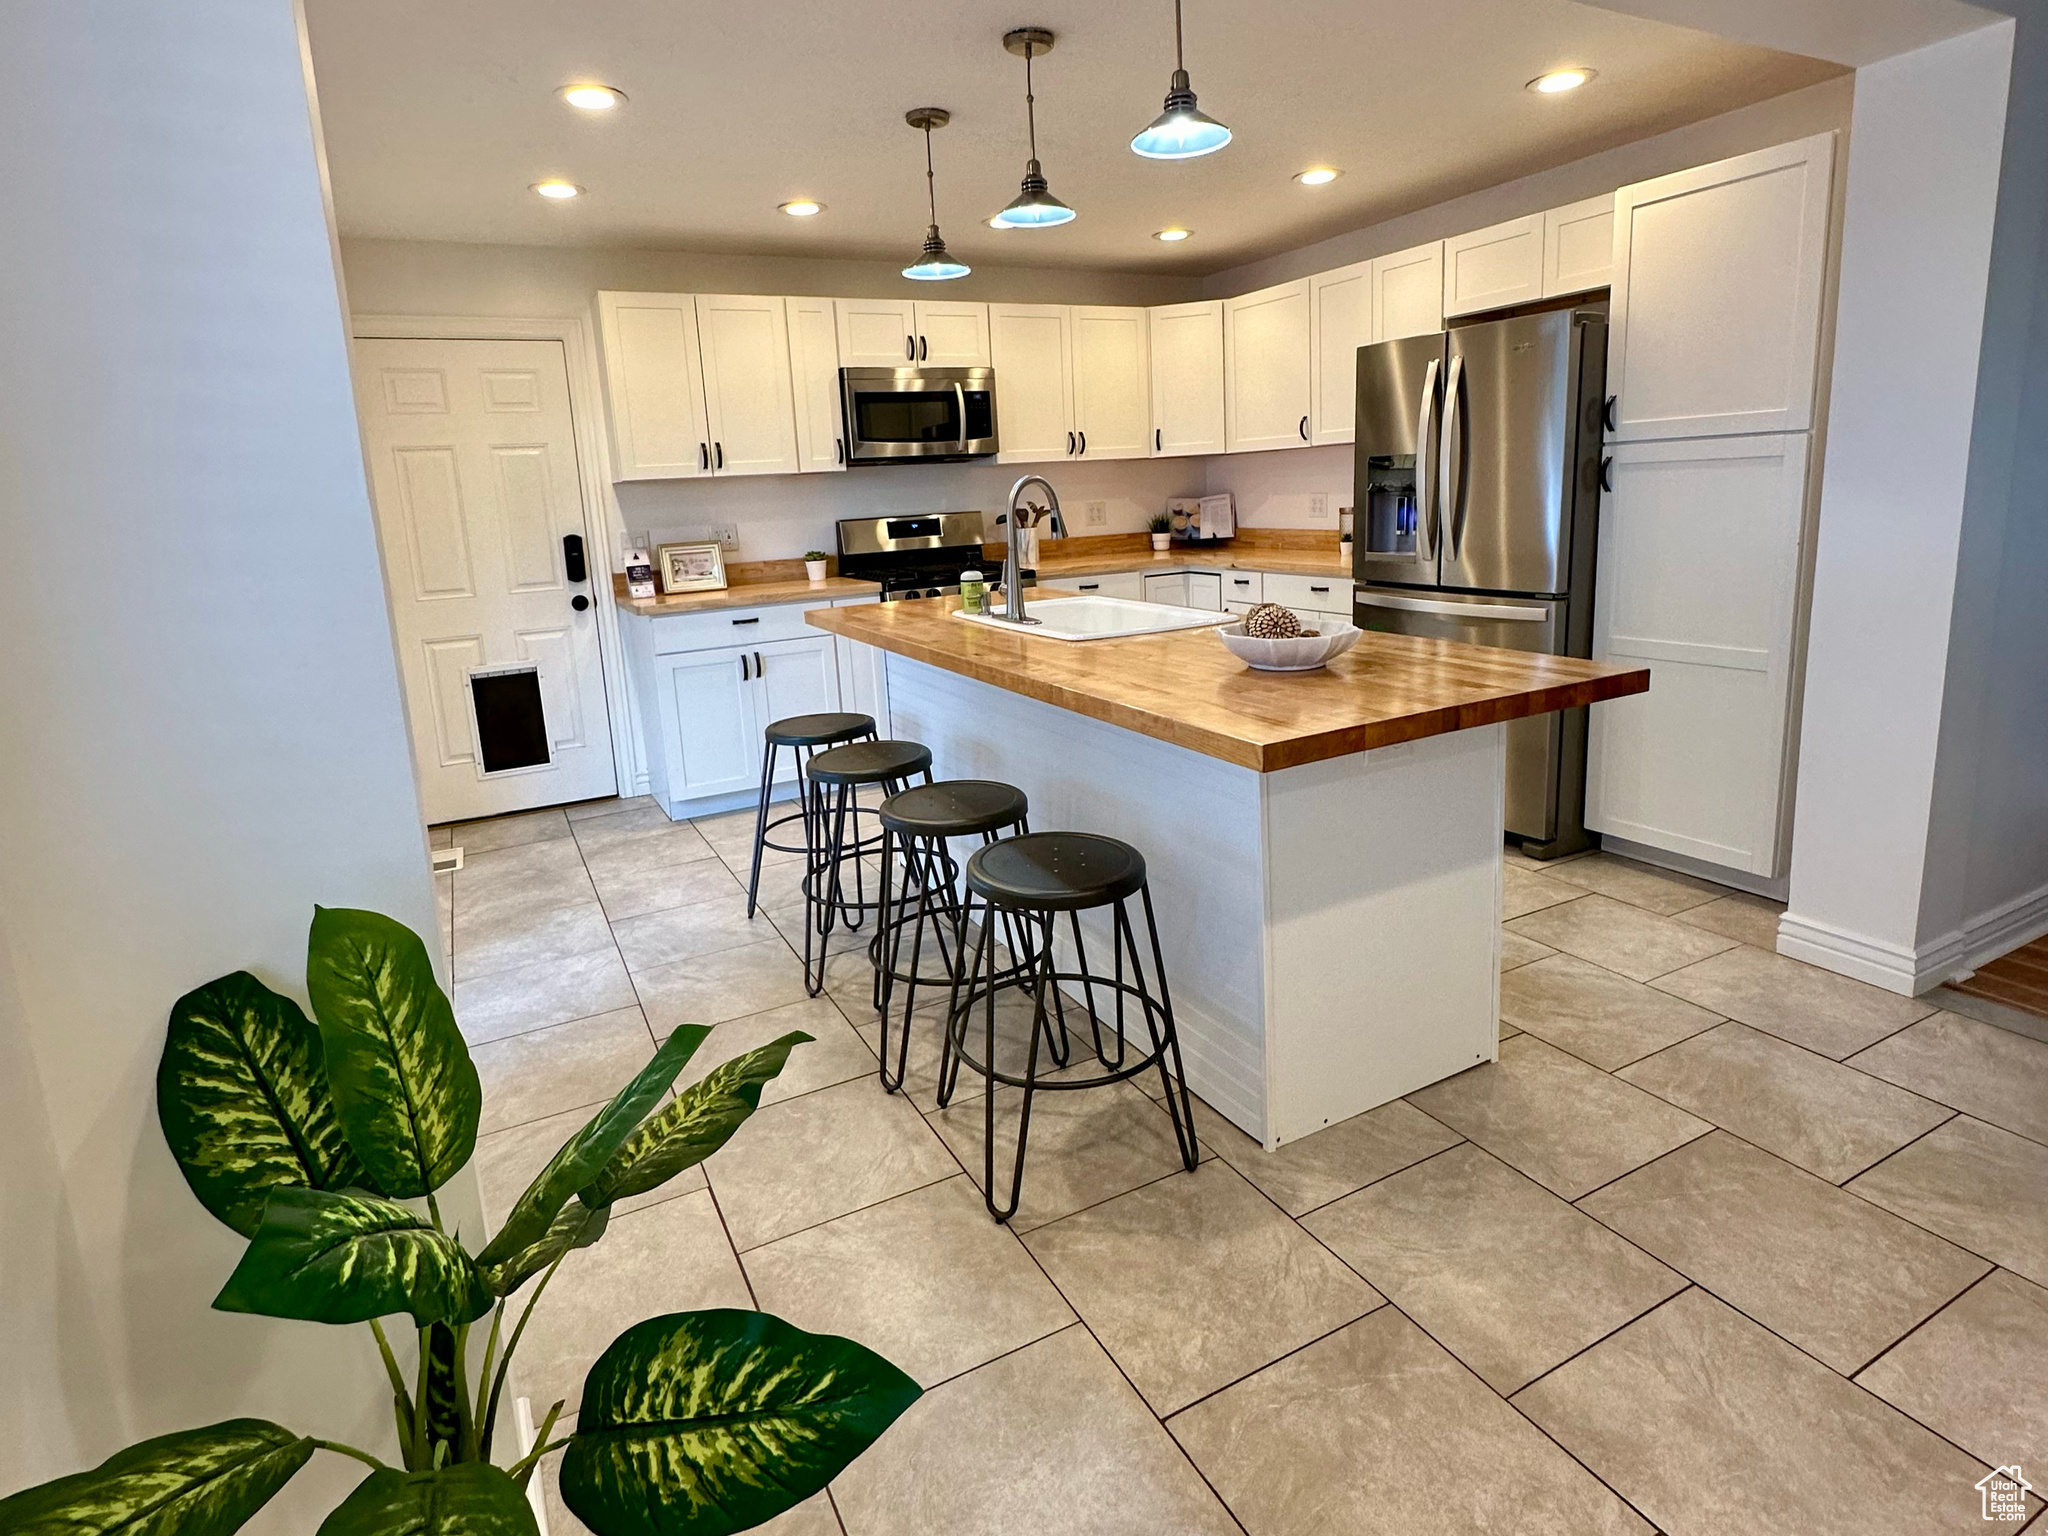 Kitchen featuring decorative light fixtures, appliances with stainless steel finishes, a center island with sink, white cabinets, and wooden counters